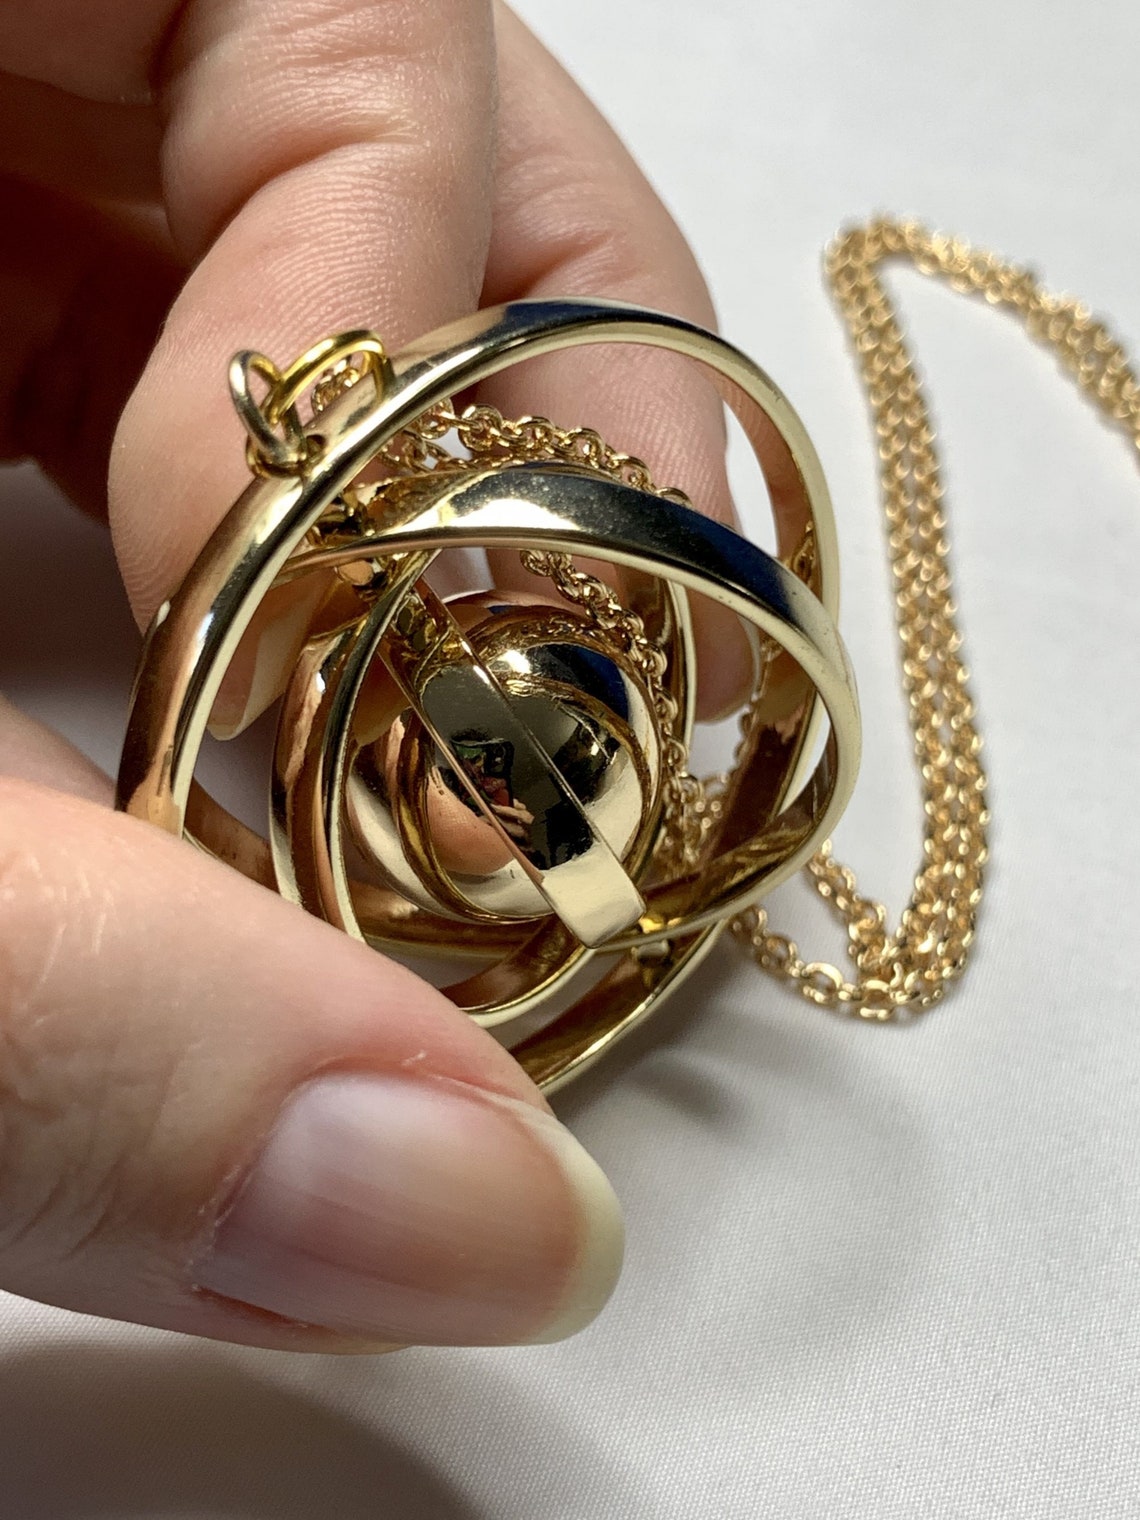 A zoom-in image of a hand holding a revolving planet pendant with gold chain